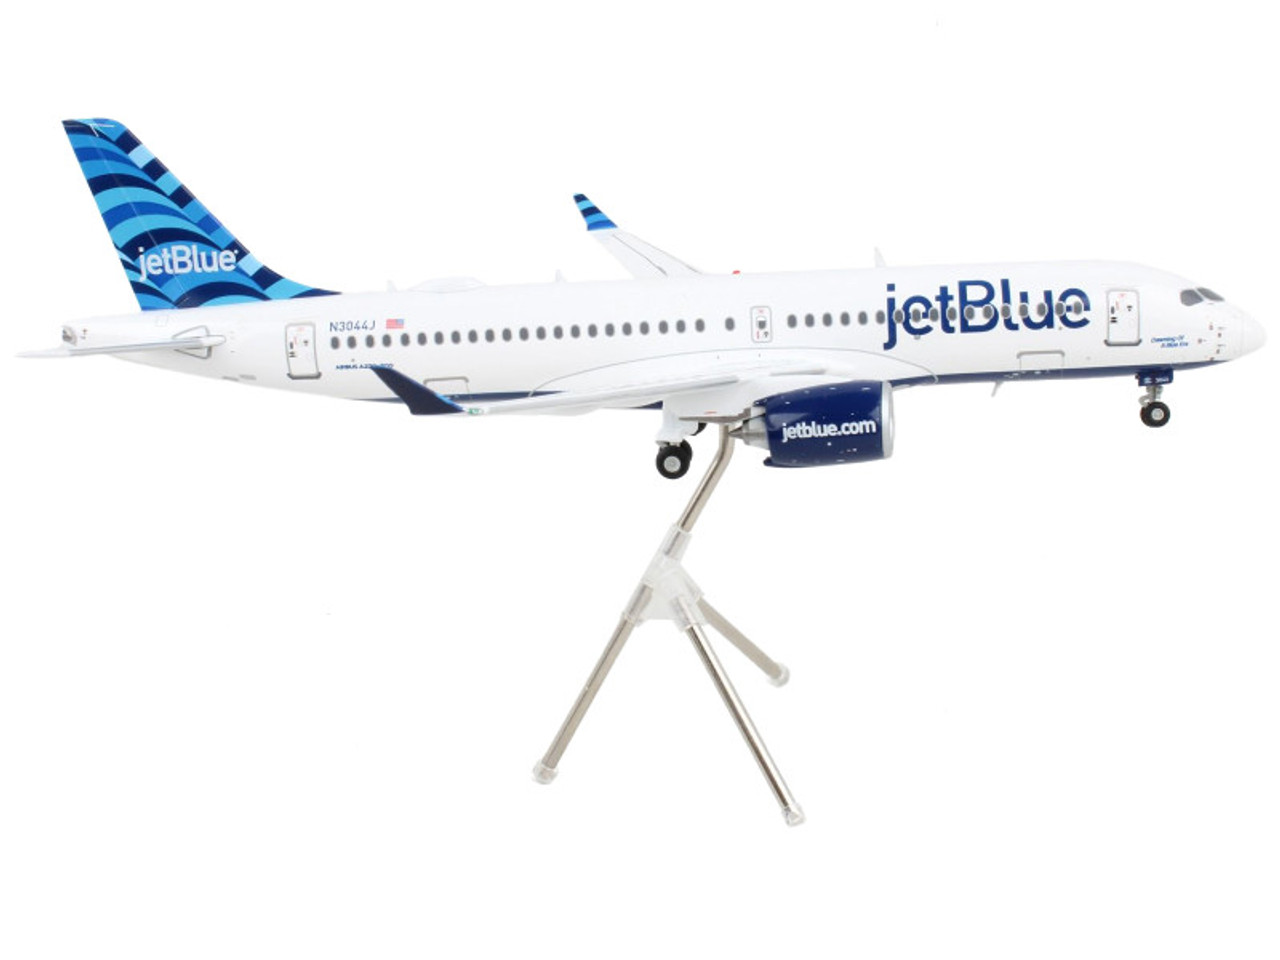 Airbus A220-300 Commercial Aircraft "JetBlue Airways" White with Blue Tail "Gemini 200" Series 1/200 Diecast Model Airplane by GeminiJets